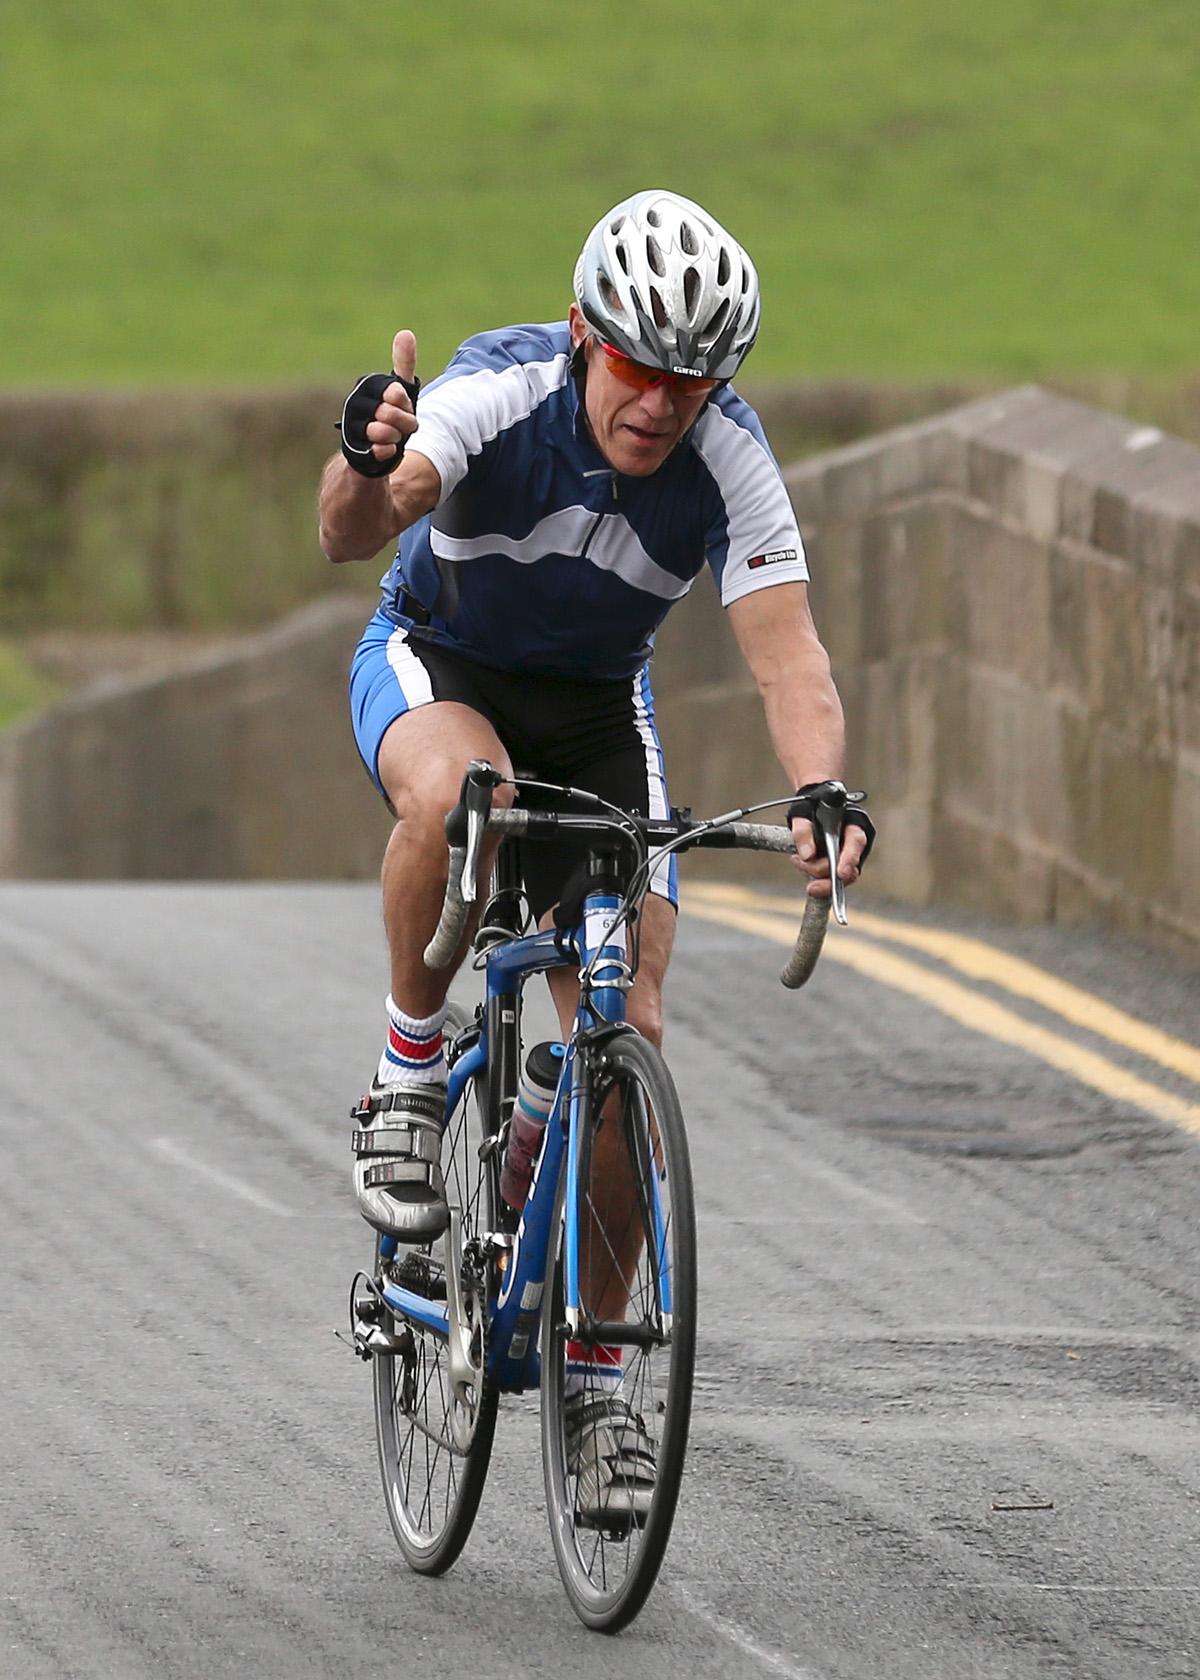 The annual Clitheroe triathlon including a swim at Ribblesdale pool and a cycle up the steep side of Jeffery Hill.